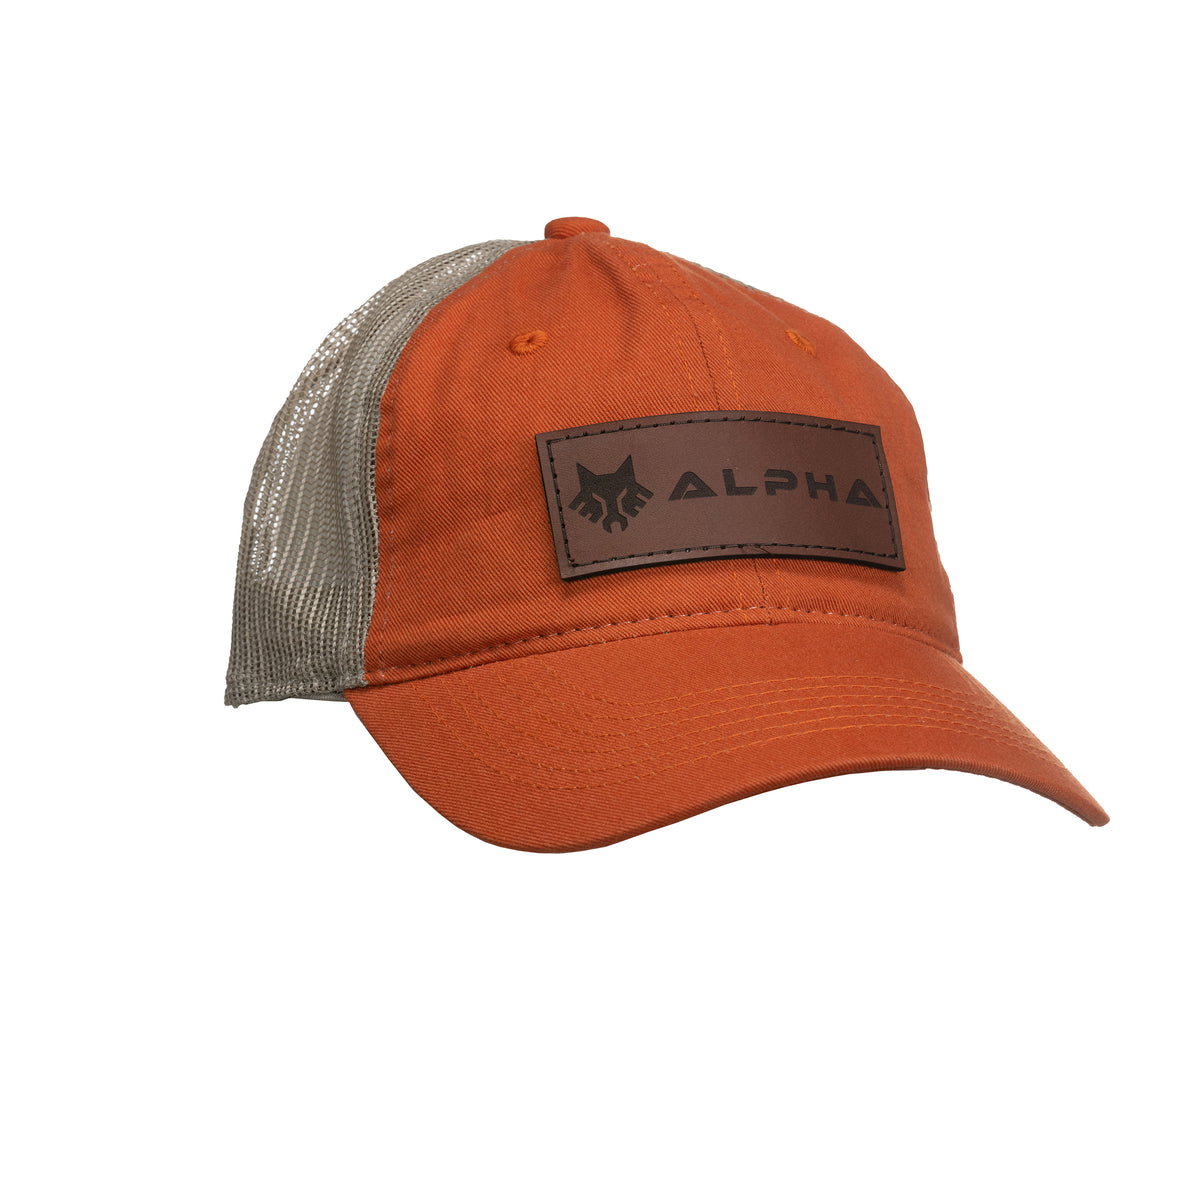 Alpha Leather Logo Patch 6-Panel Garment Washed Trucker Hat